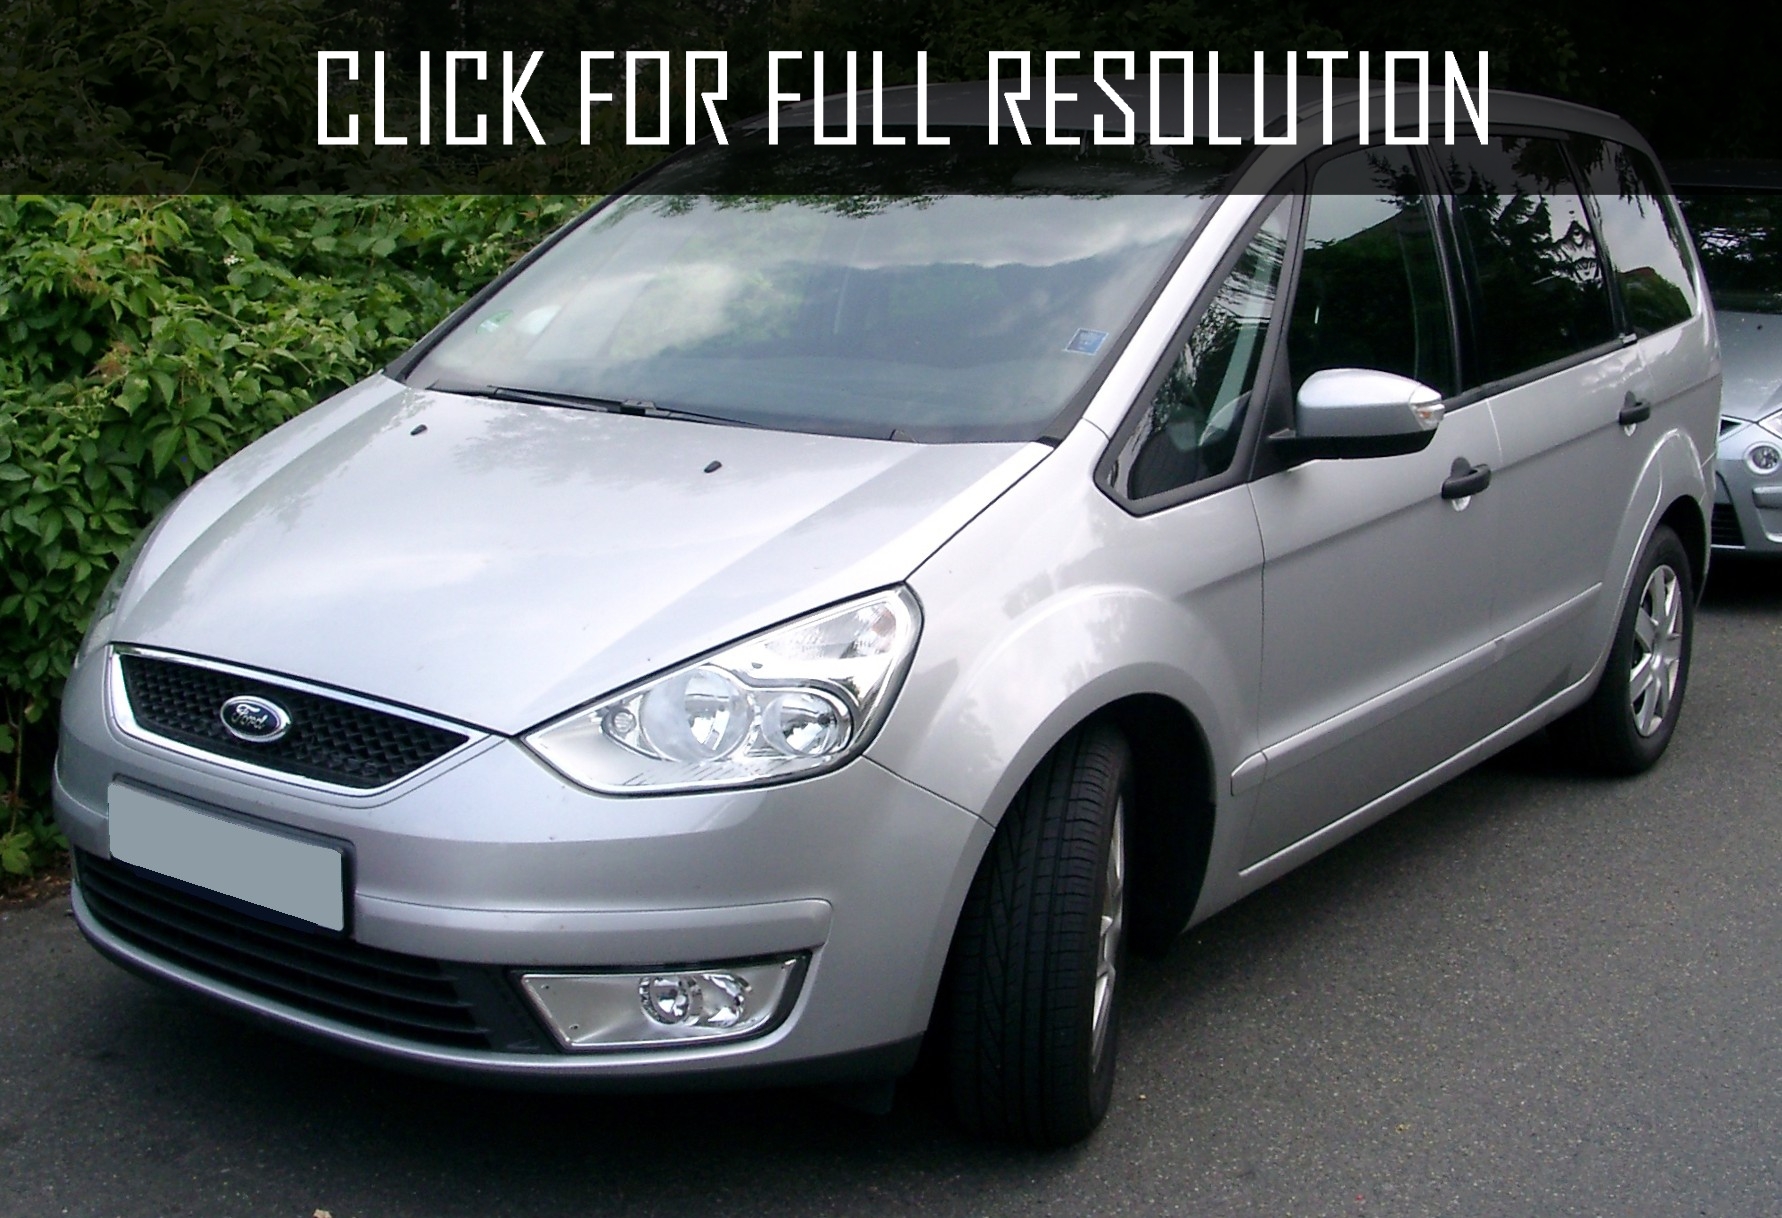 Ford Galaxy Mk3 reviews, prices, ratings with various photos